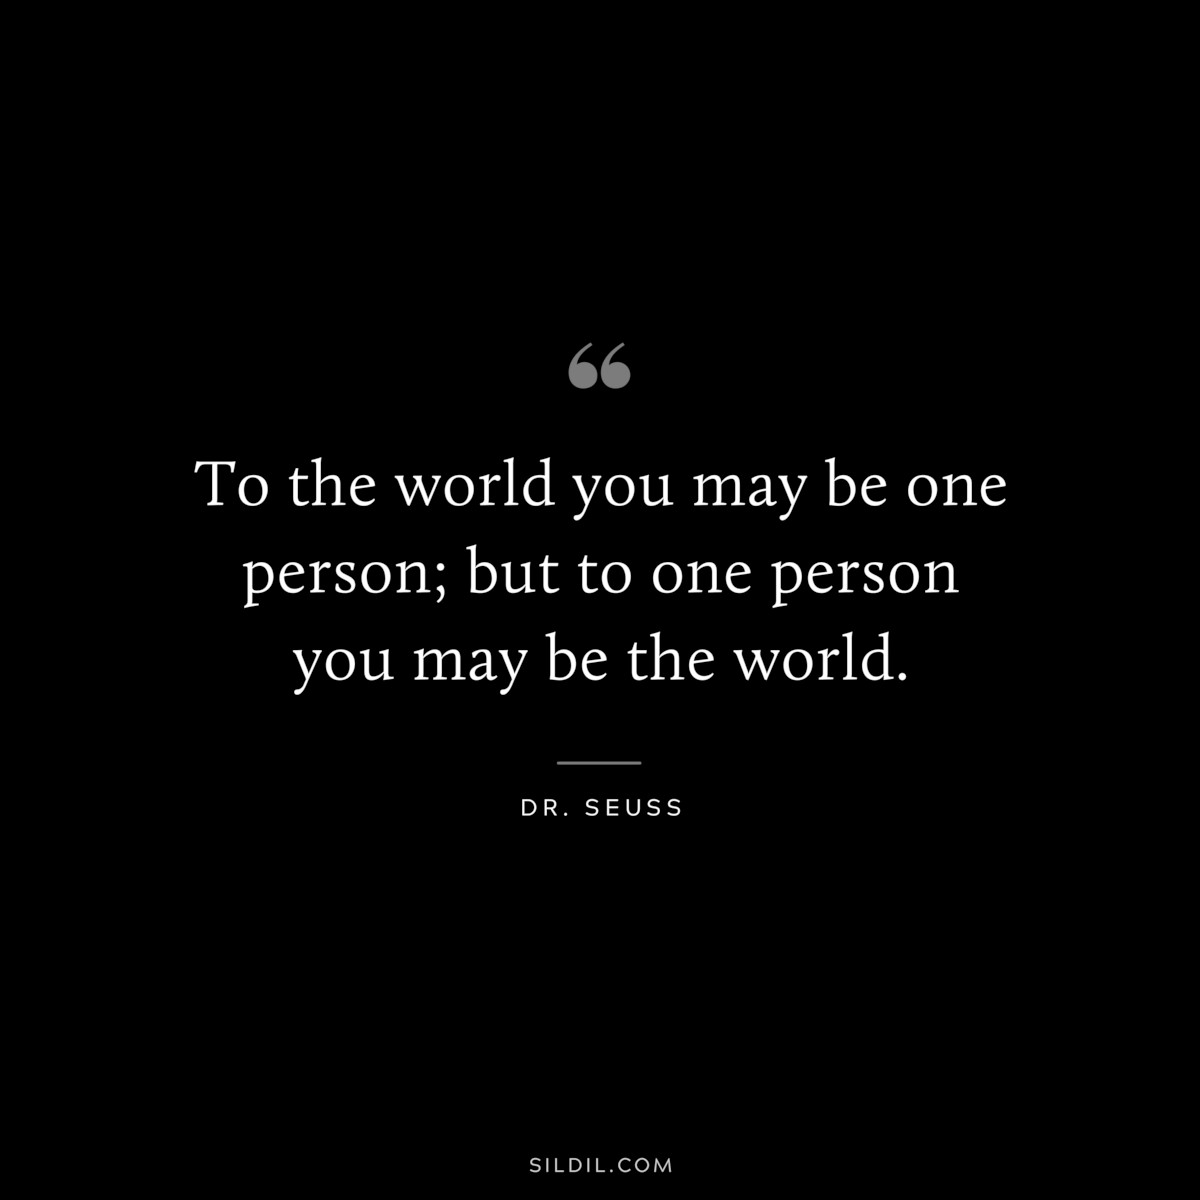 To the world you may be one person; but to one person you may be the world. ― Dr. Seuss